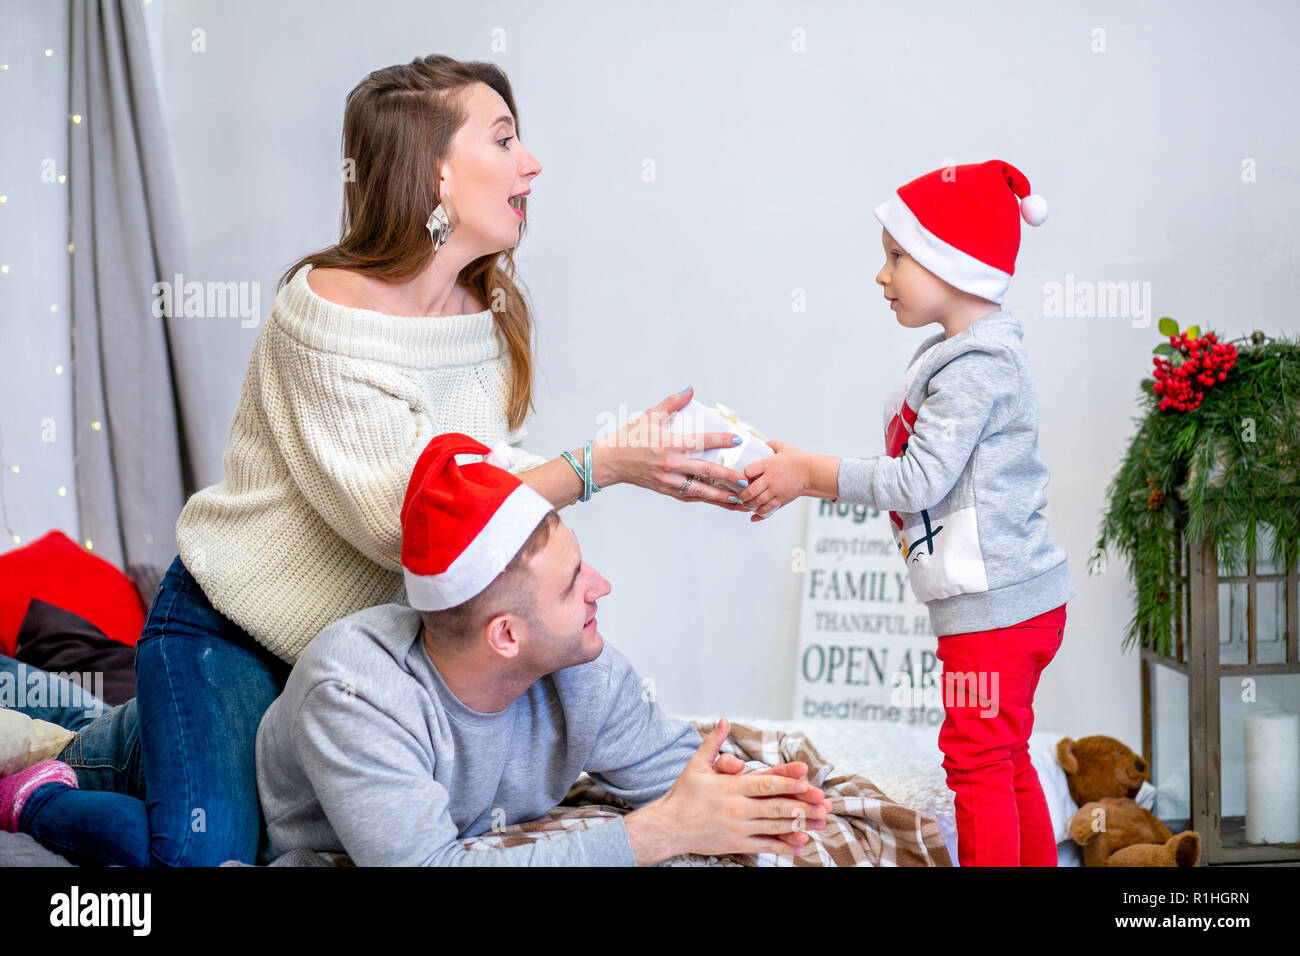 Happy family, father, mother and son, in the morning in bedroom decorated for Christmas. They open presents and have fun. New Year's and Christmas theme. Holiday mood Stock Photo